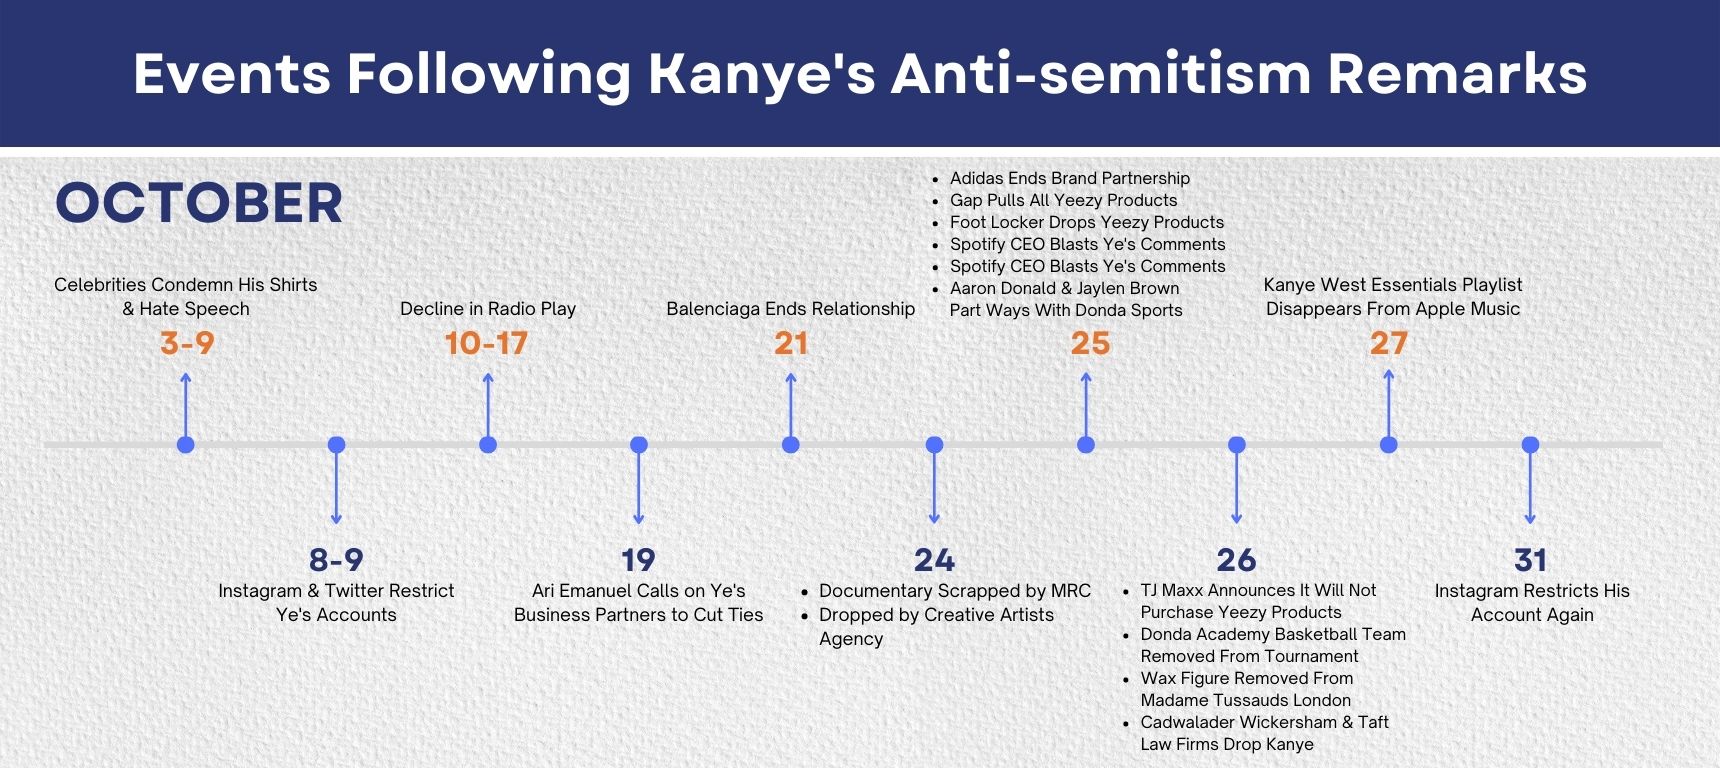 A timeline of the aftermath Kanye West faced after making anti-Semitic comments in October 2022